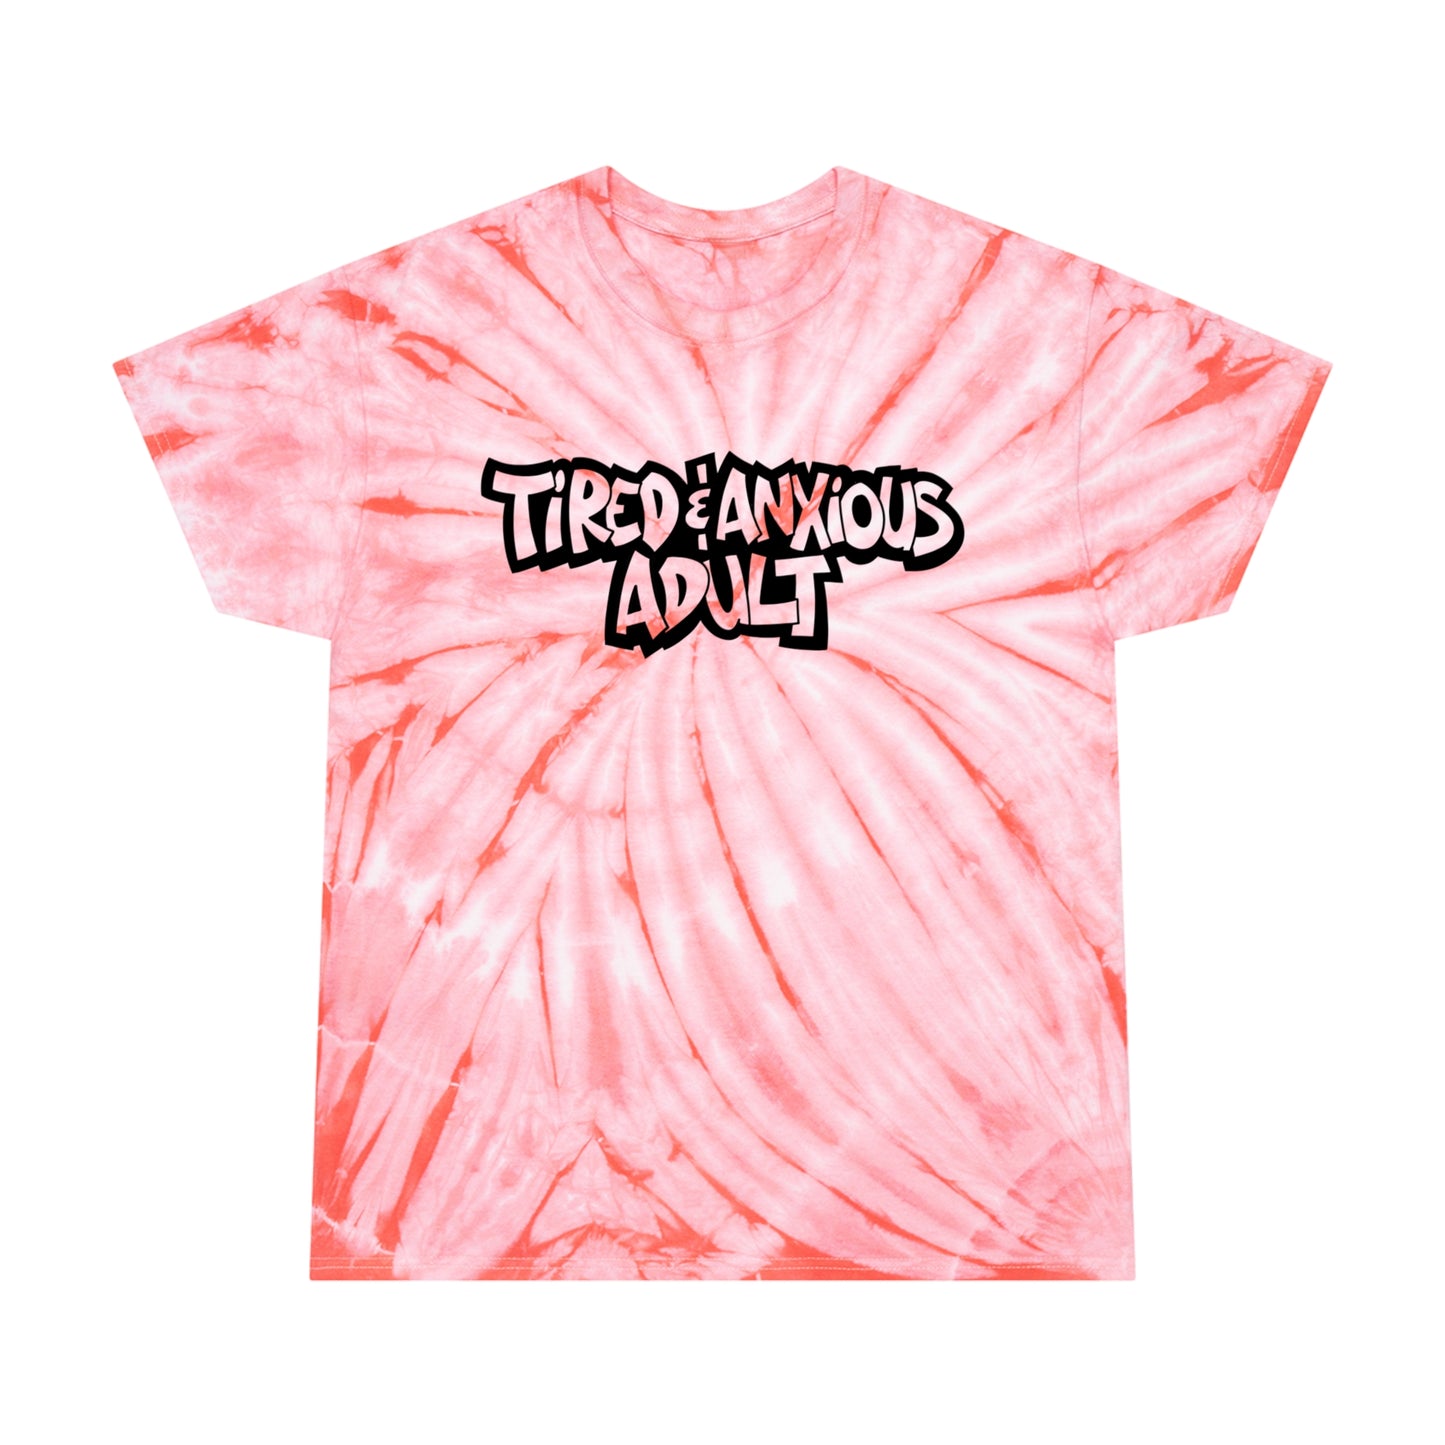 Tired & Anxious Adult tie-dye t-shirt